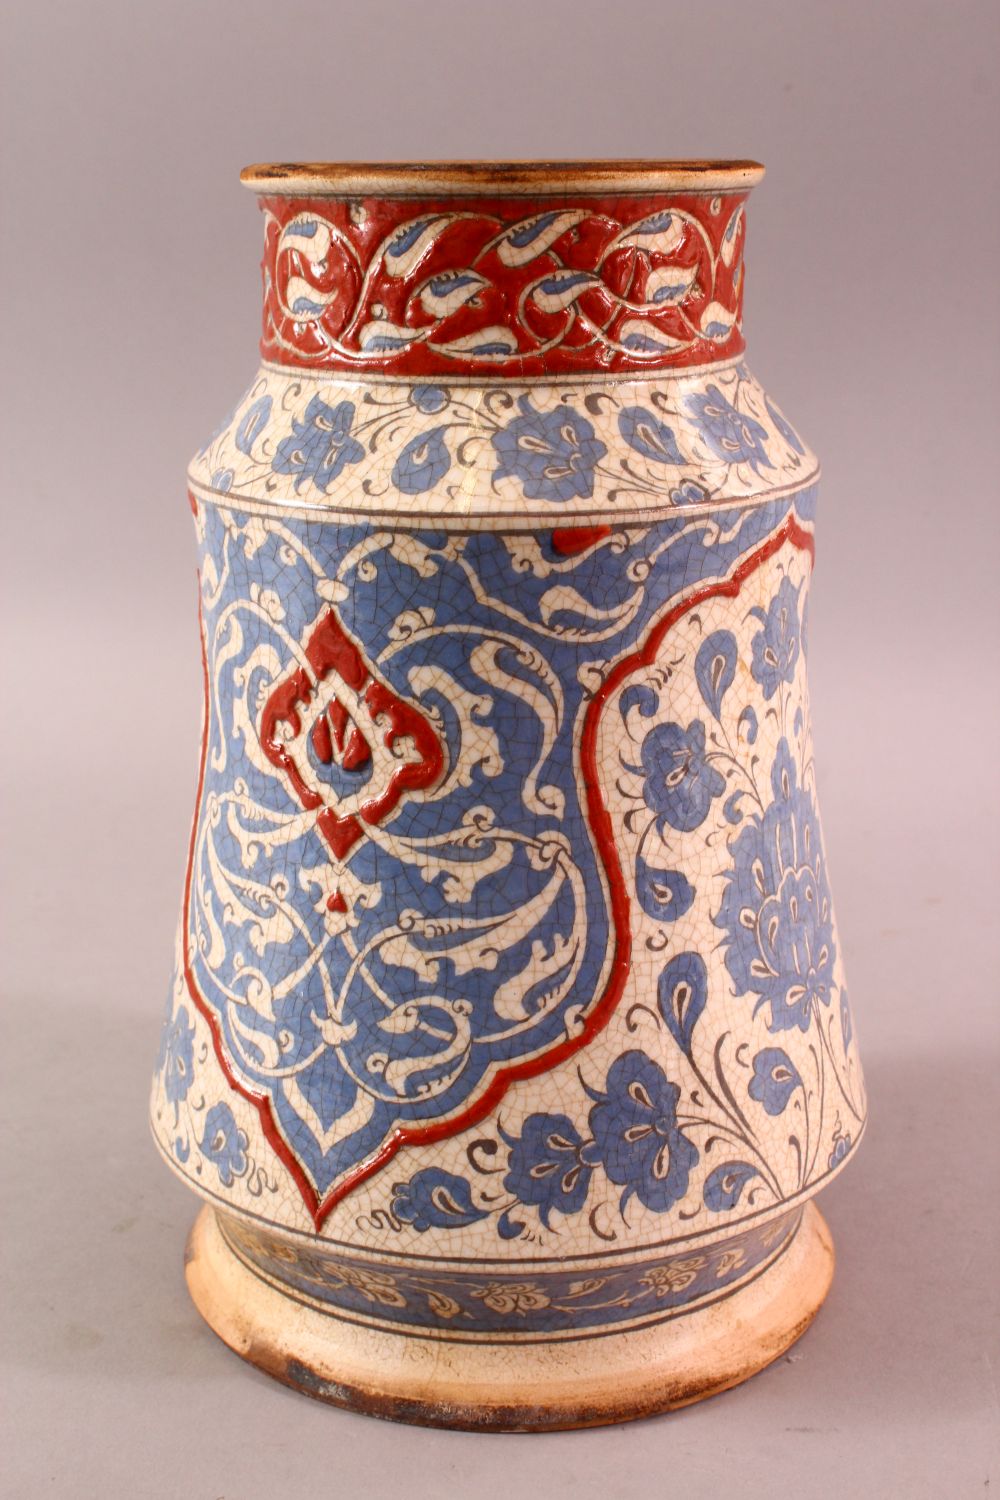 A FRENCH POTTERY IZNIK STYLE POTTERY VASE, with a hite ground and sy blue decoration with floral - Image 4 of 6